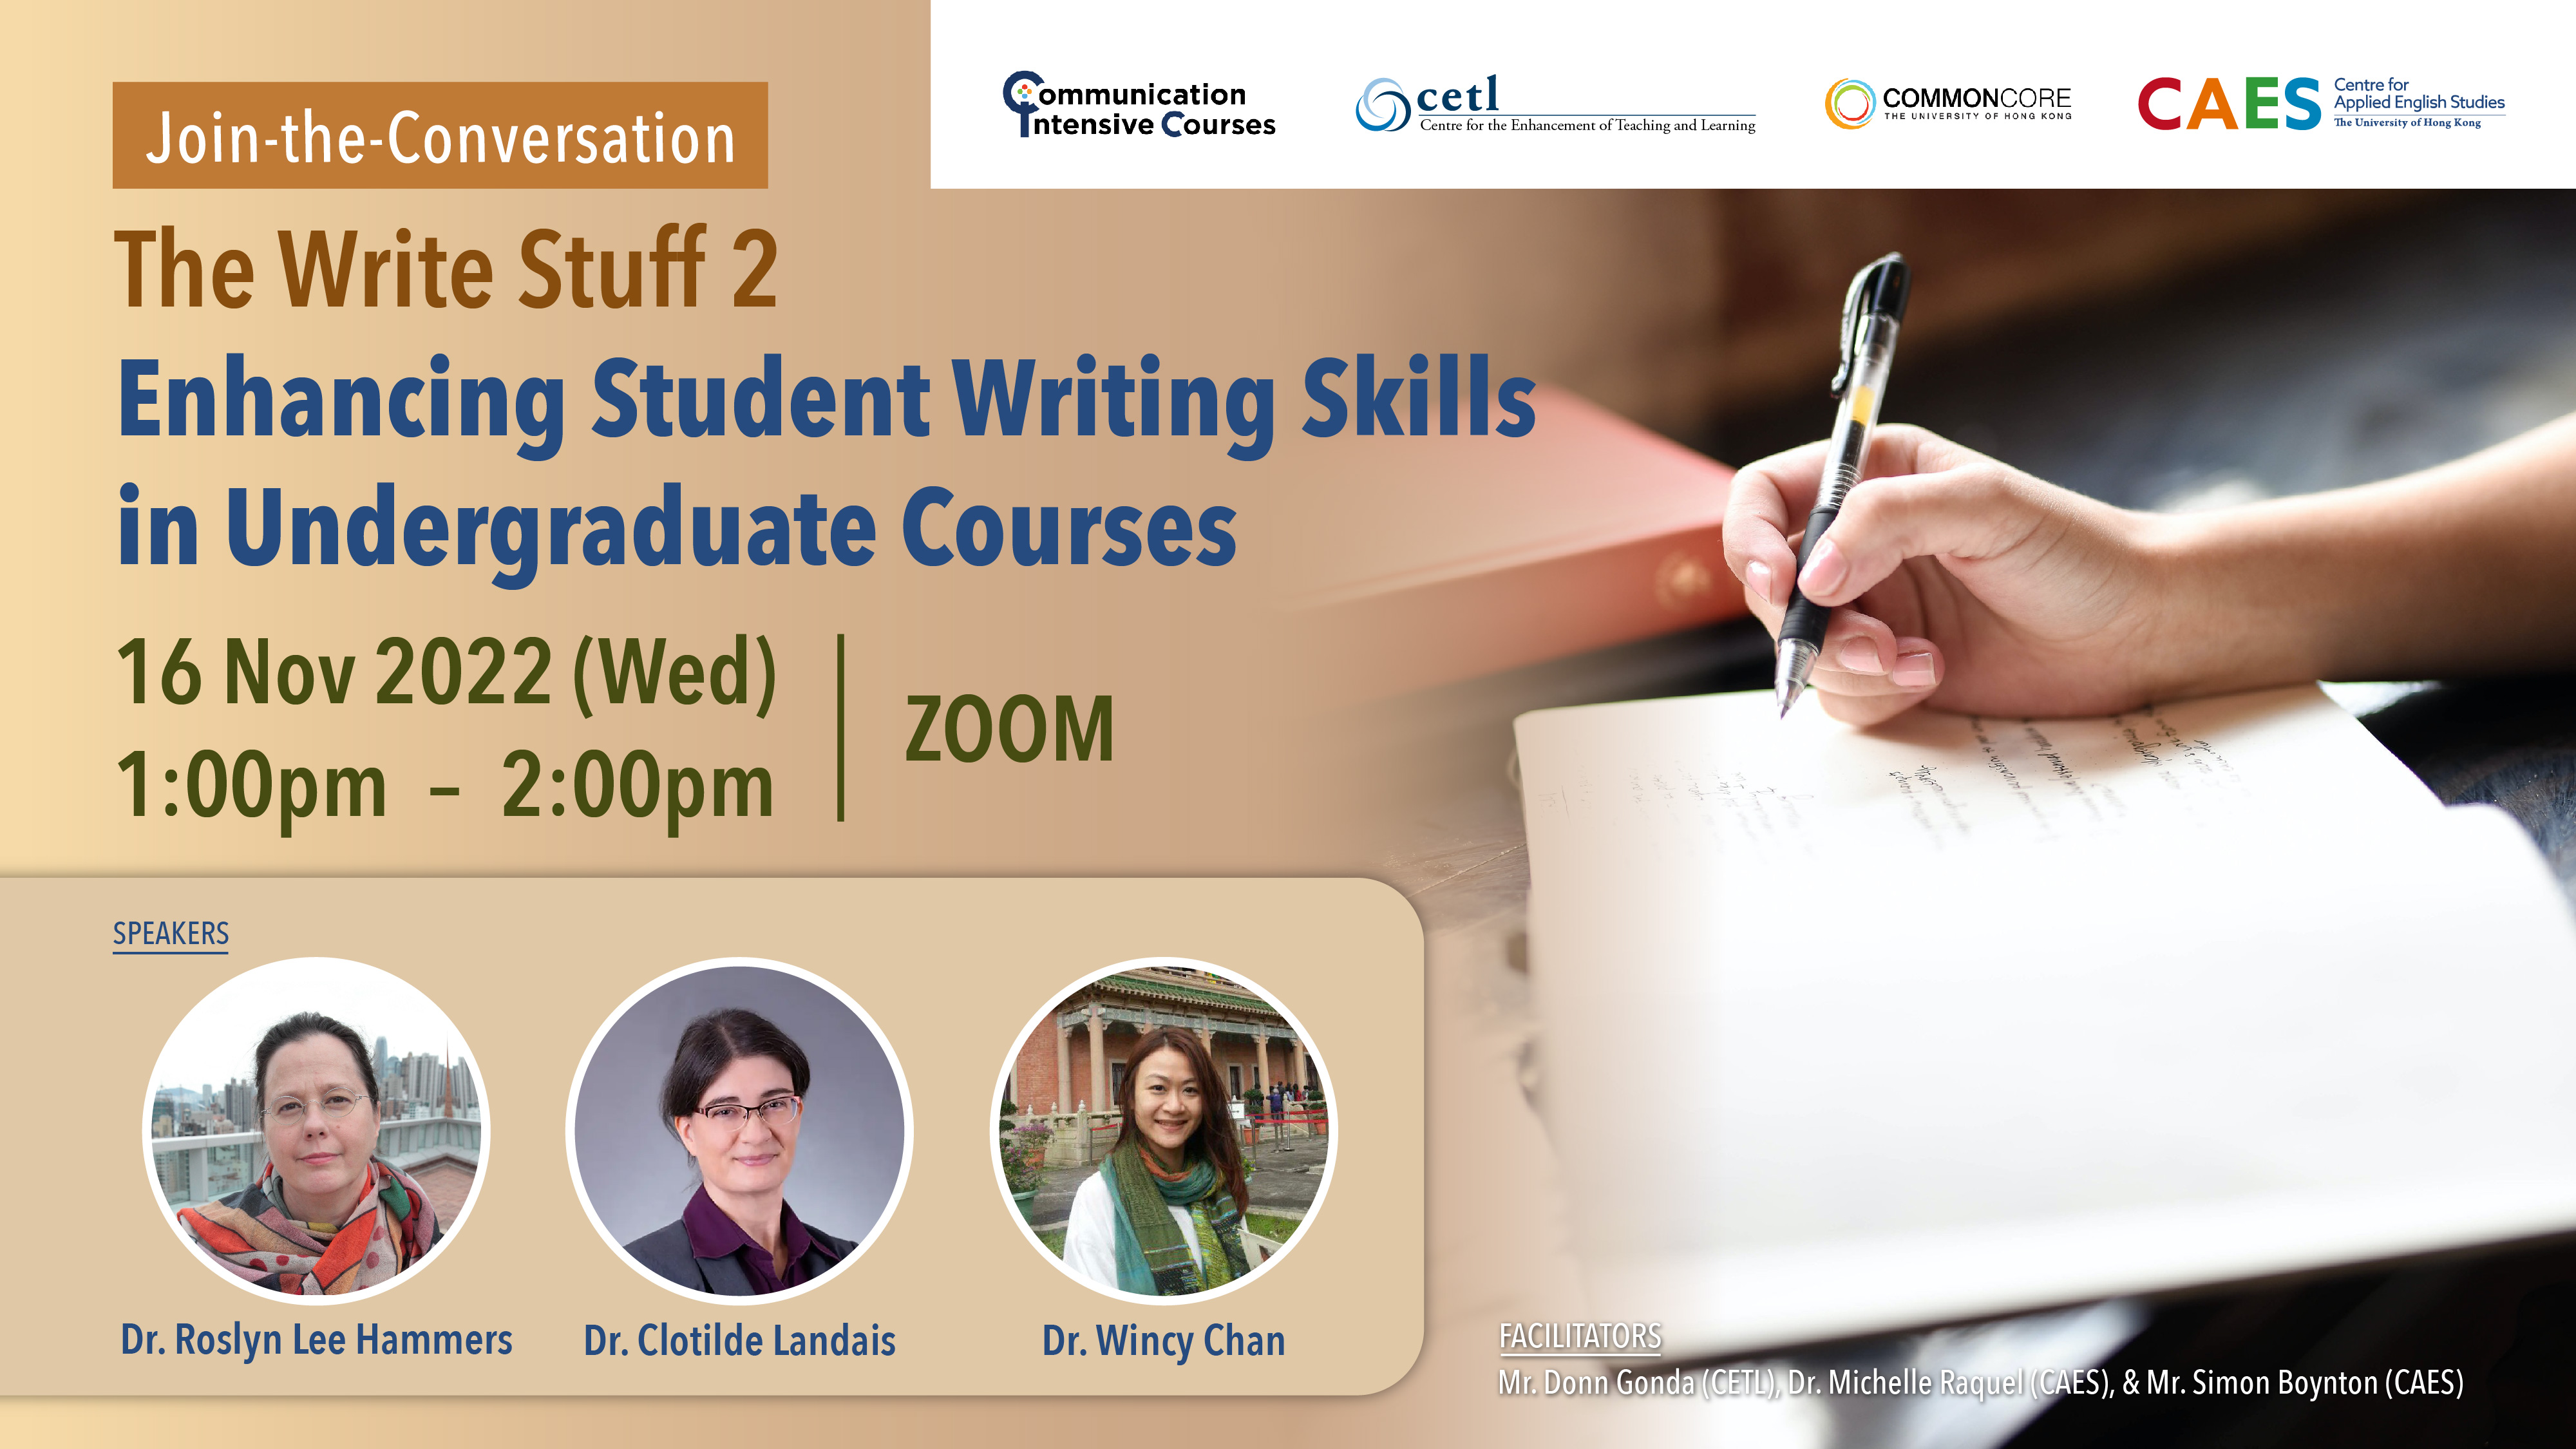 Join-the-Conversation – The Write Stuff 2 – Enhancing Student Writing Skills in Undergraduate Courses